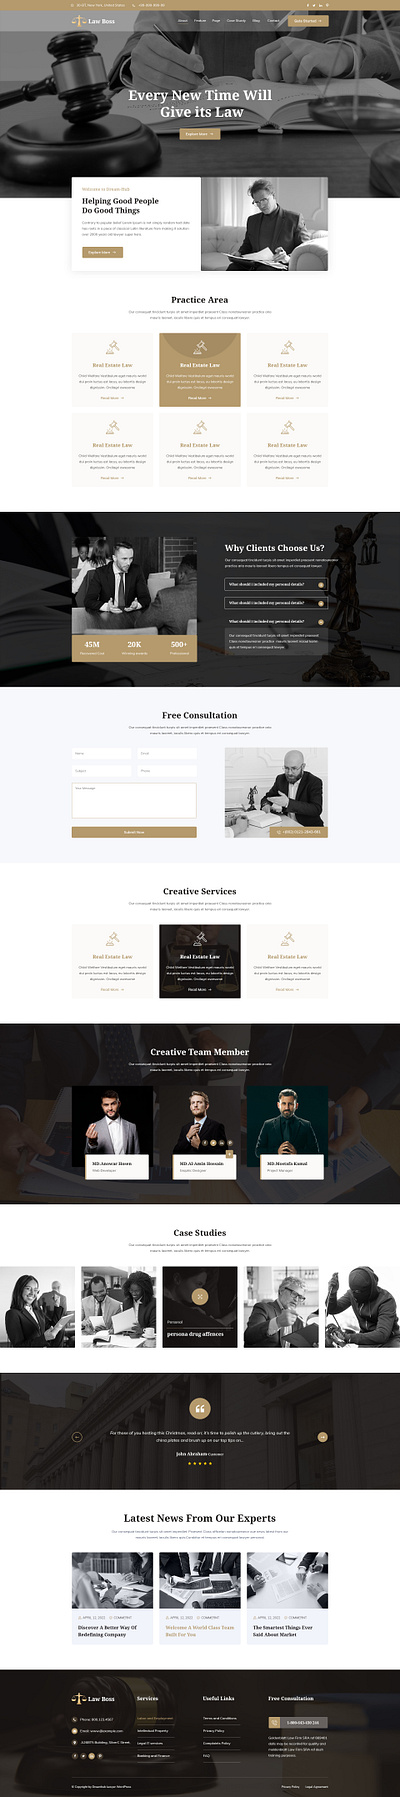 Lawboss - Law, Lawyer & Attorney WordPress Theme solicitor